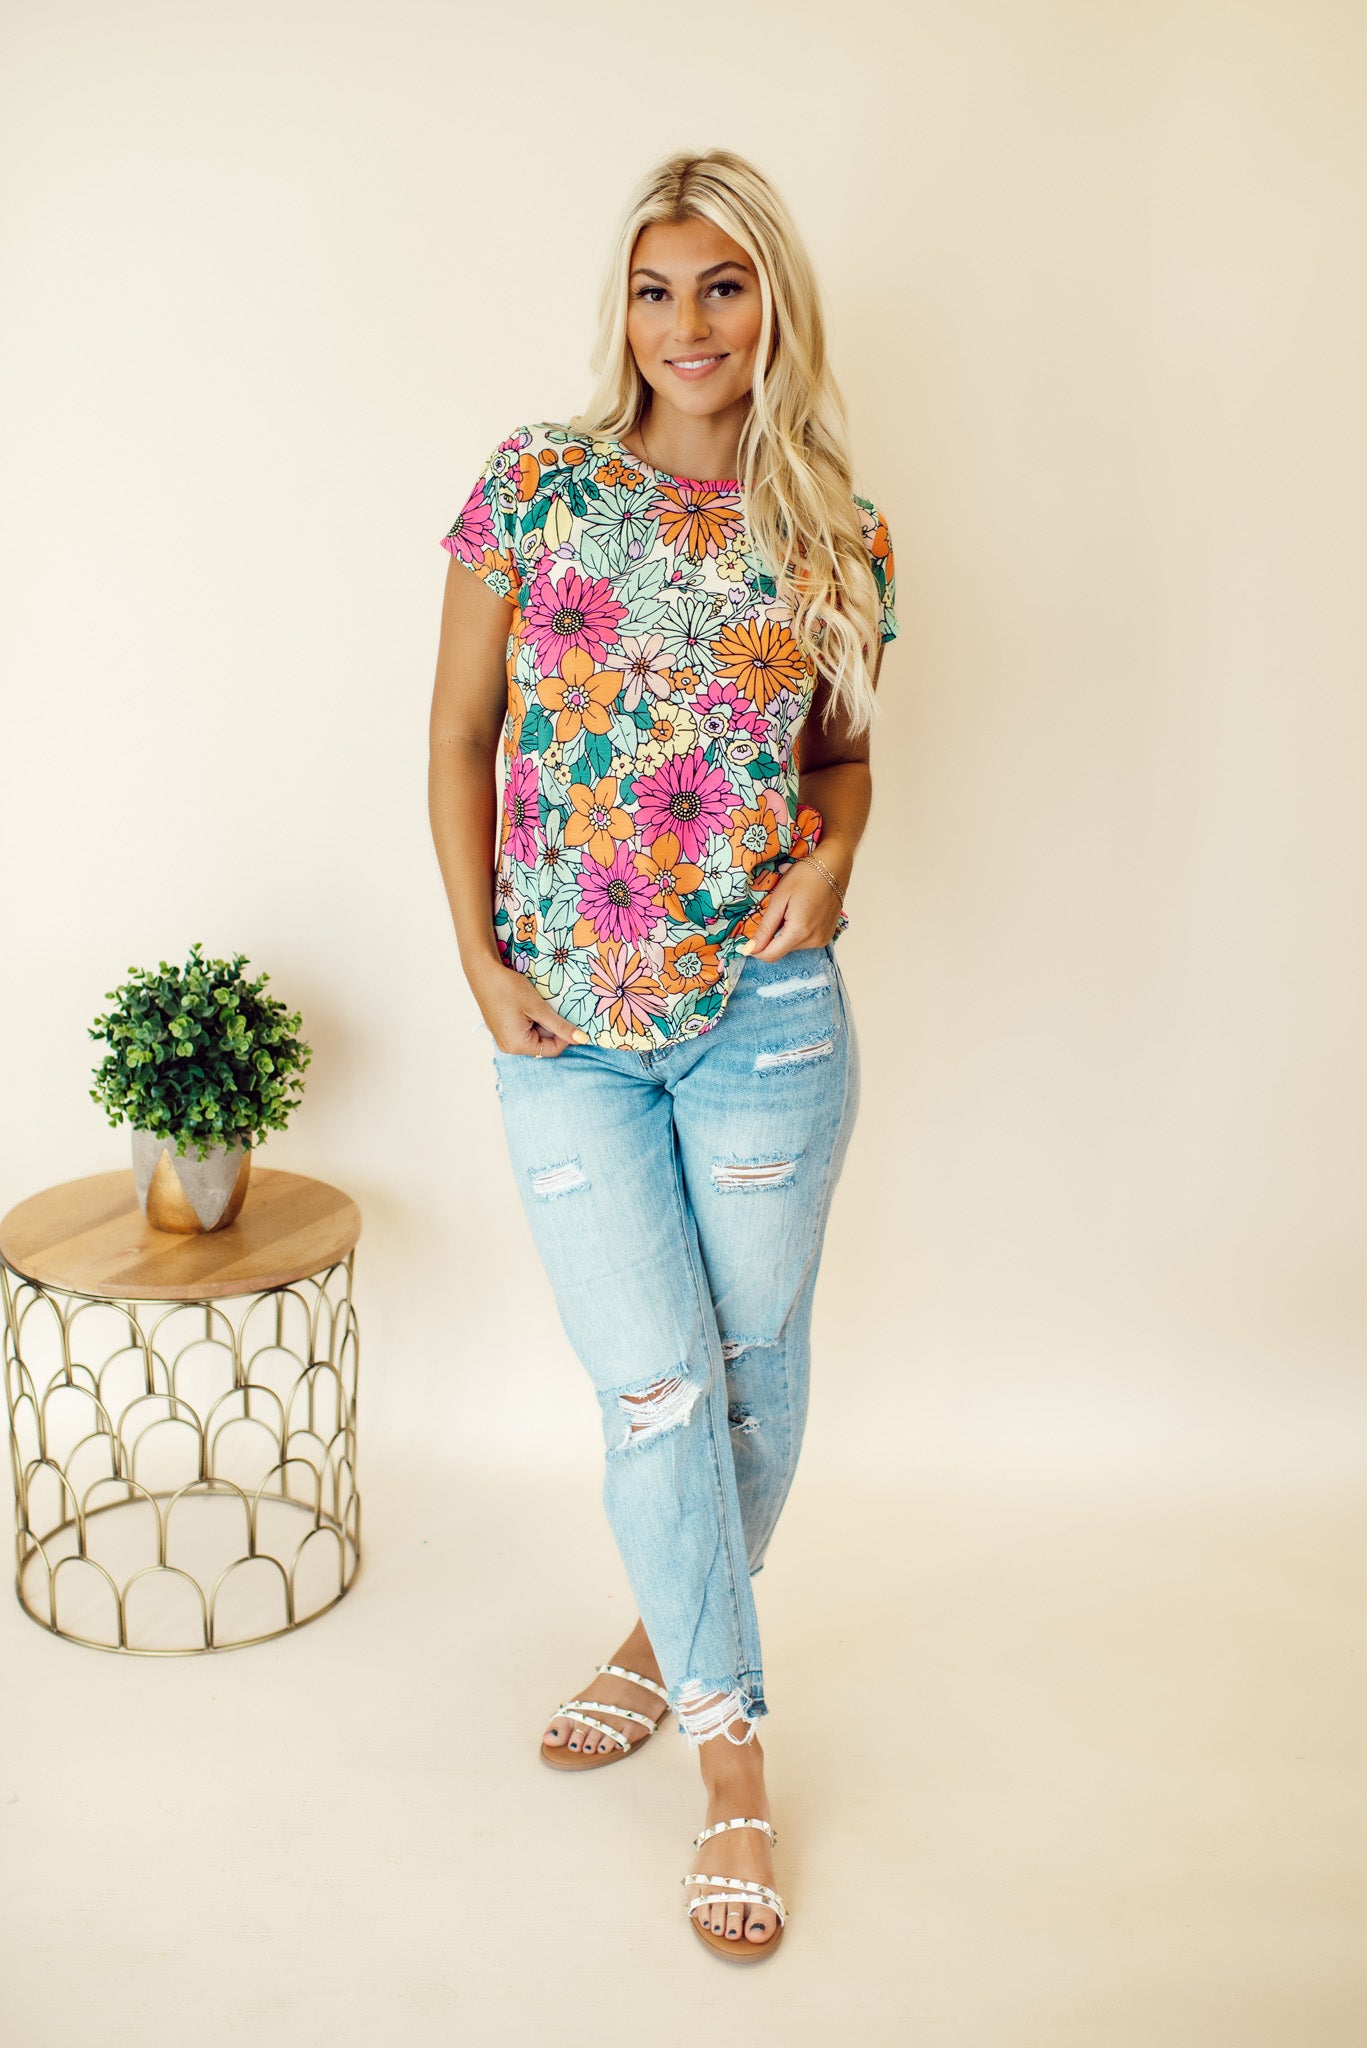 Bright Days Ahead Floral Top